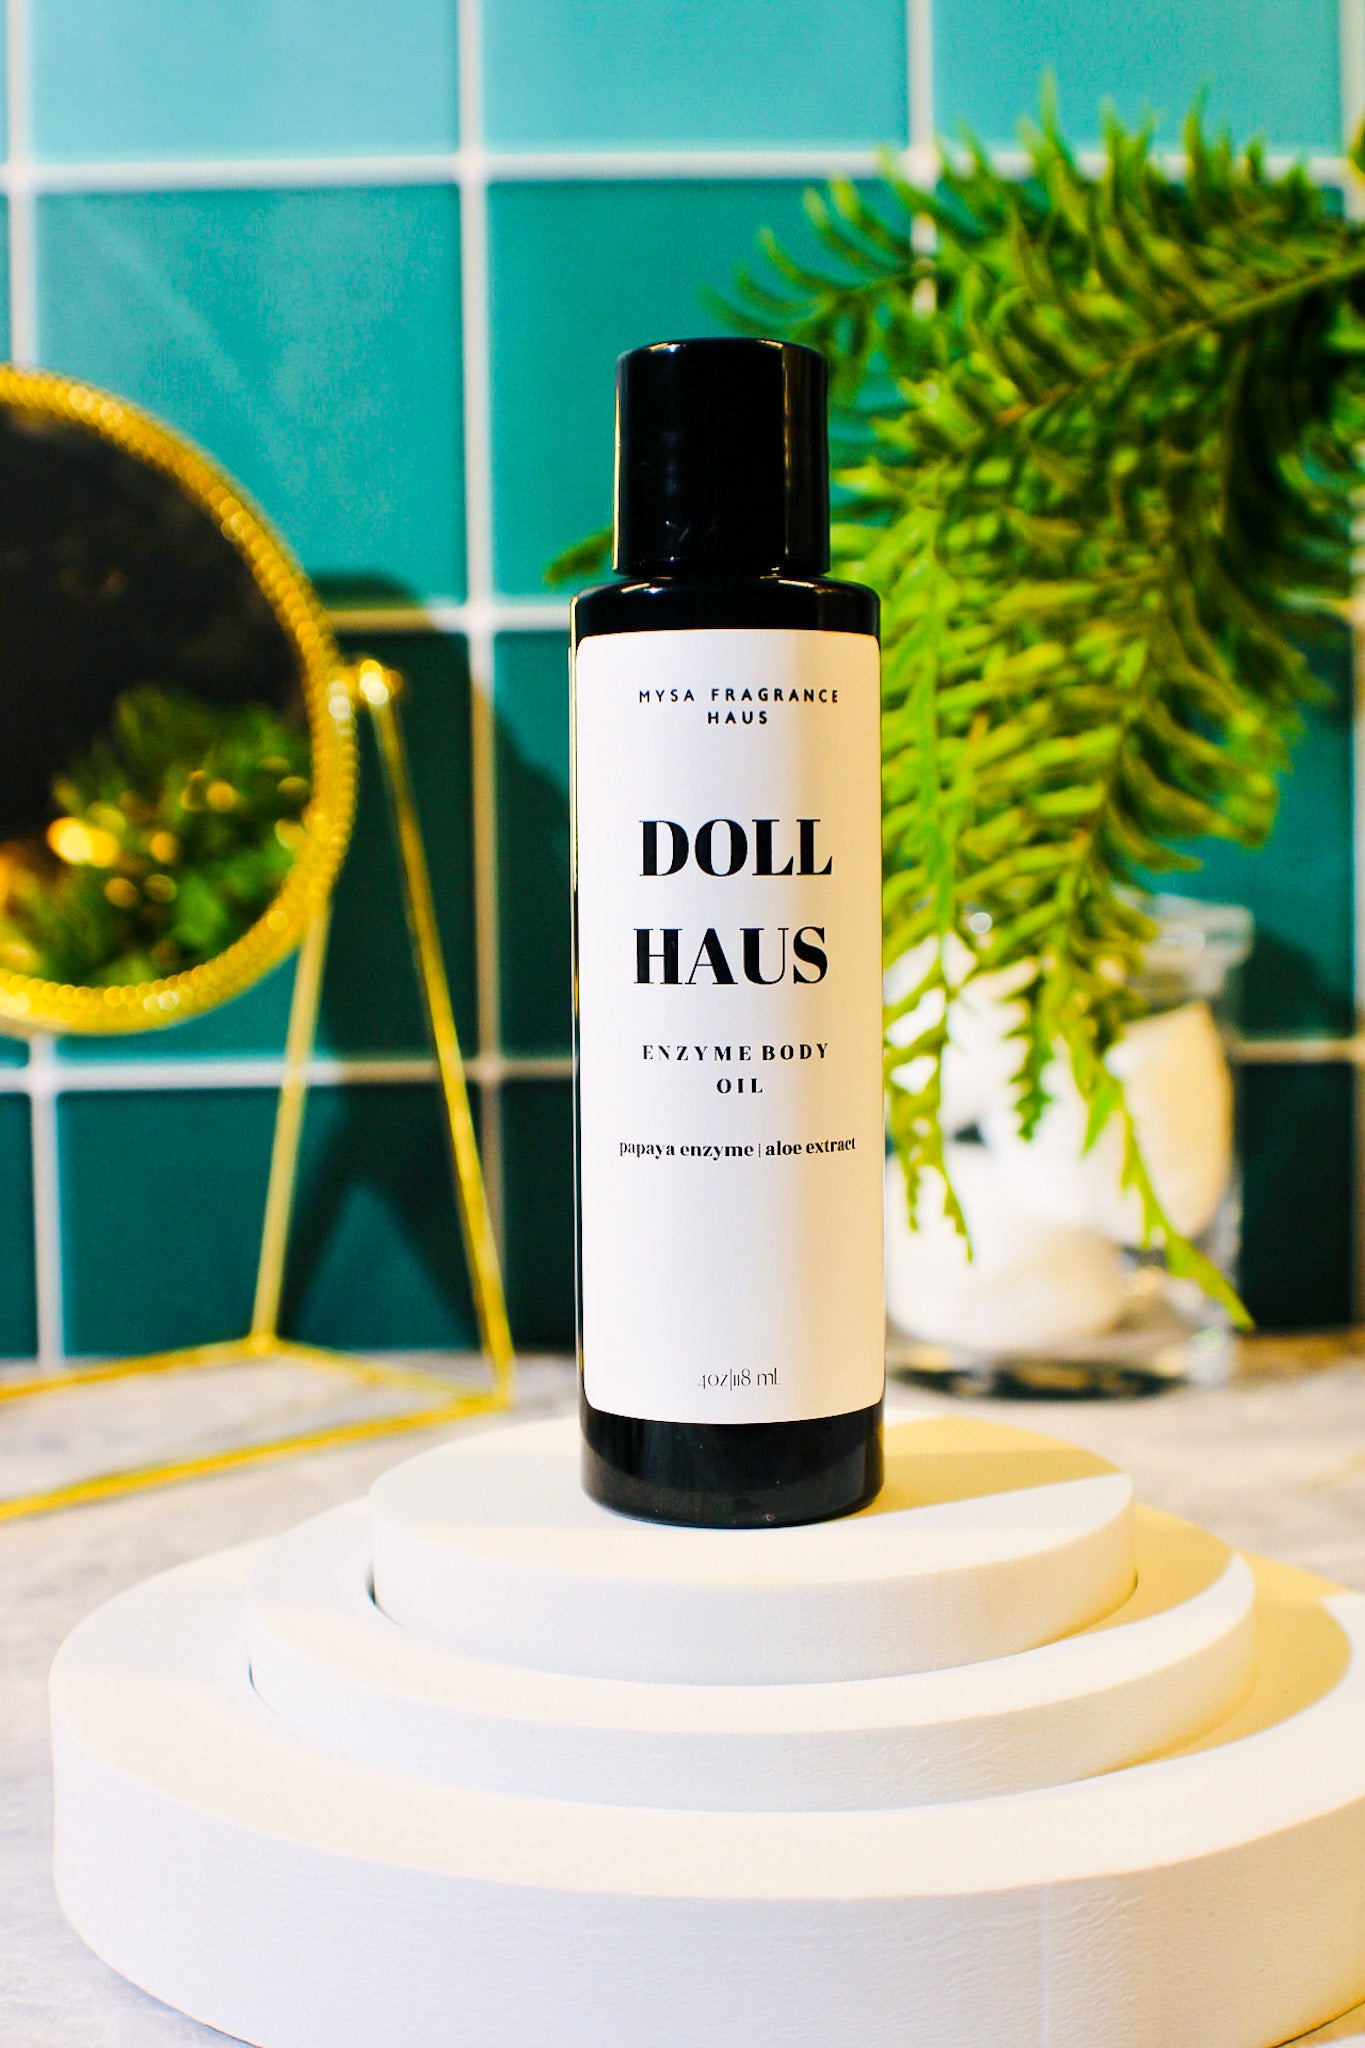 Doll Haus Enzyme Body Oil